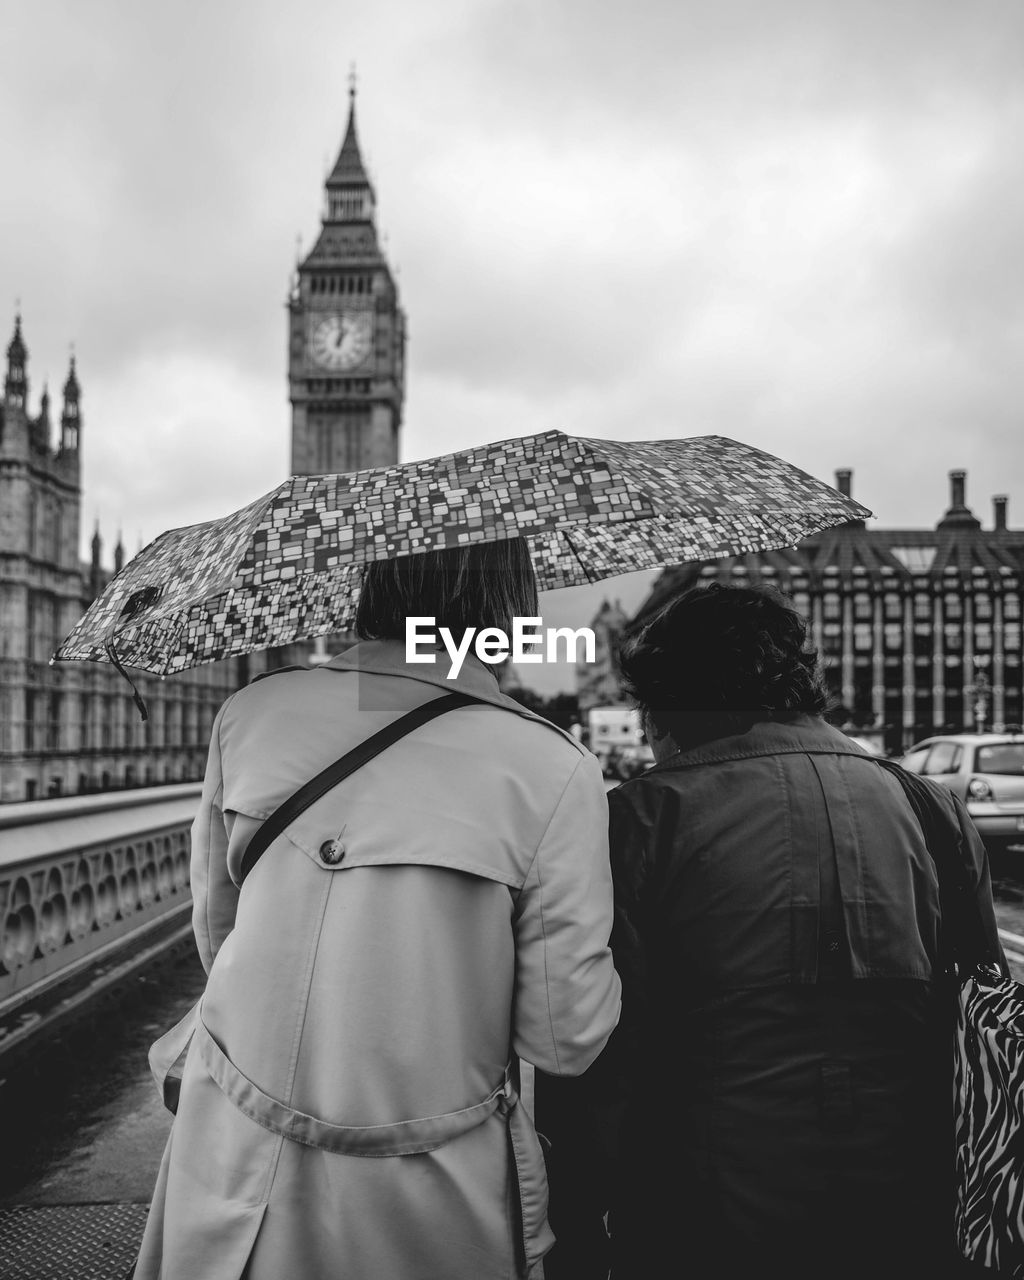 Rear view of people carrying umbrella while walking on street with big ben in background